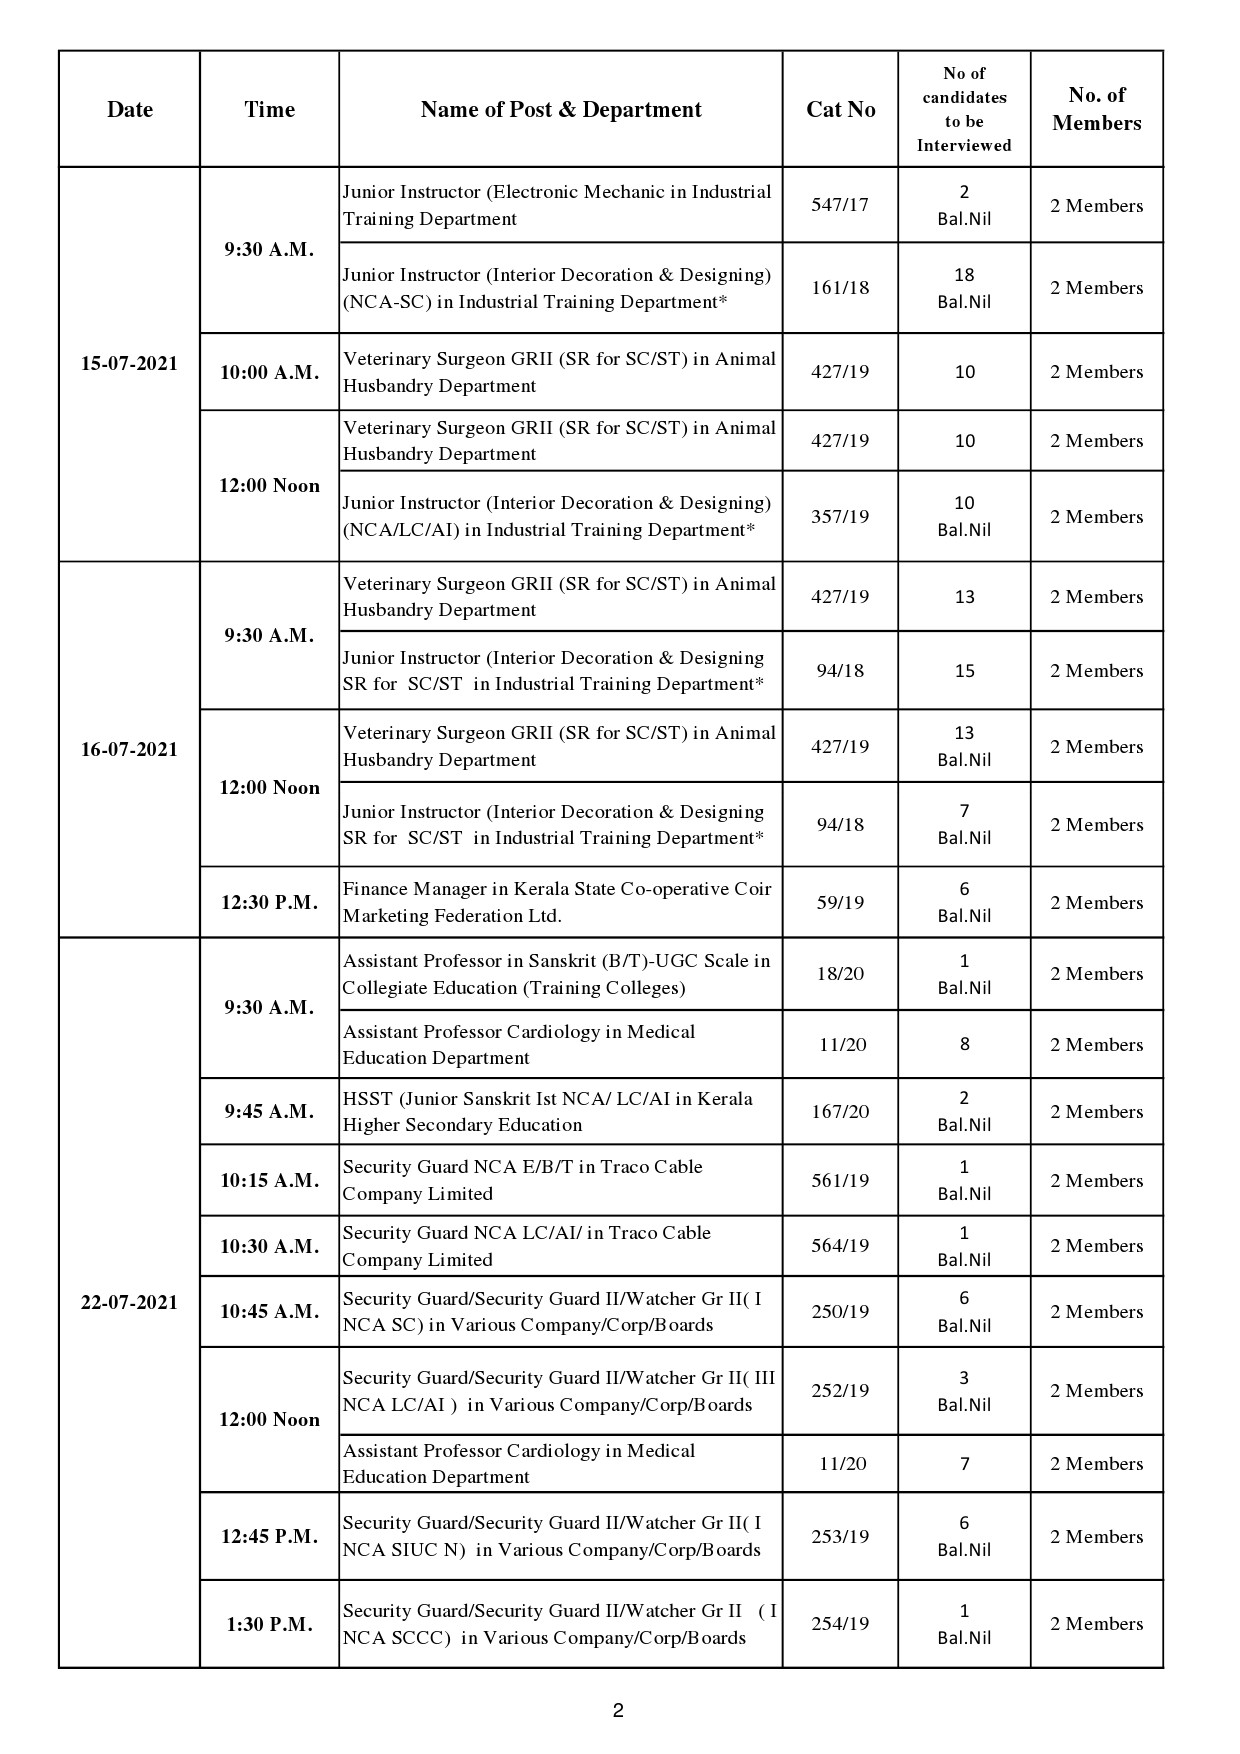 KPSC Interview Programme Of July And August 2021 - Notification Image 2